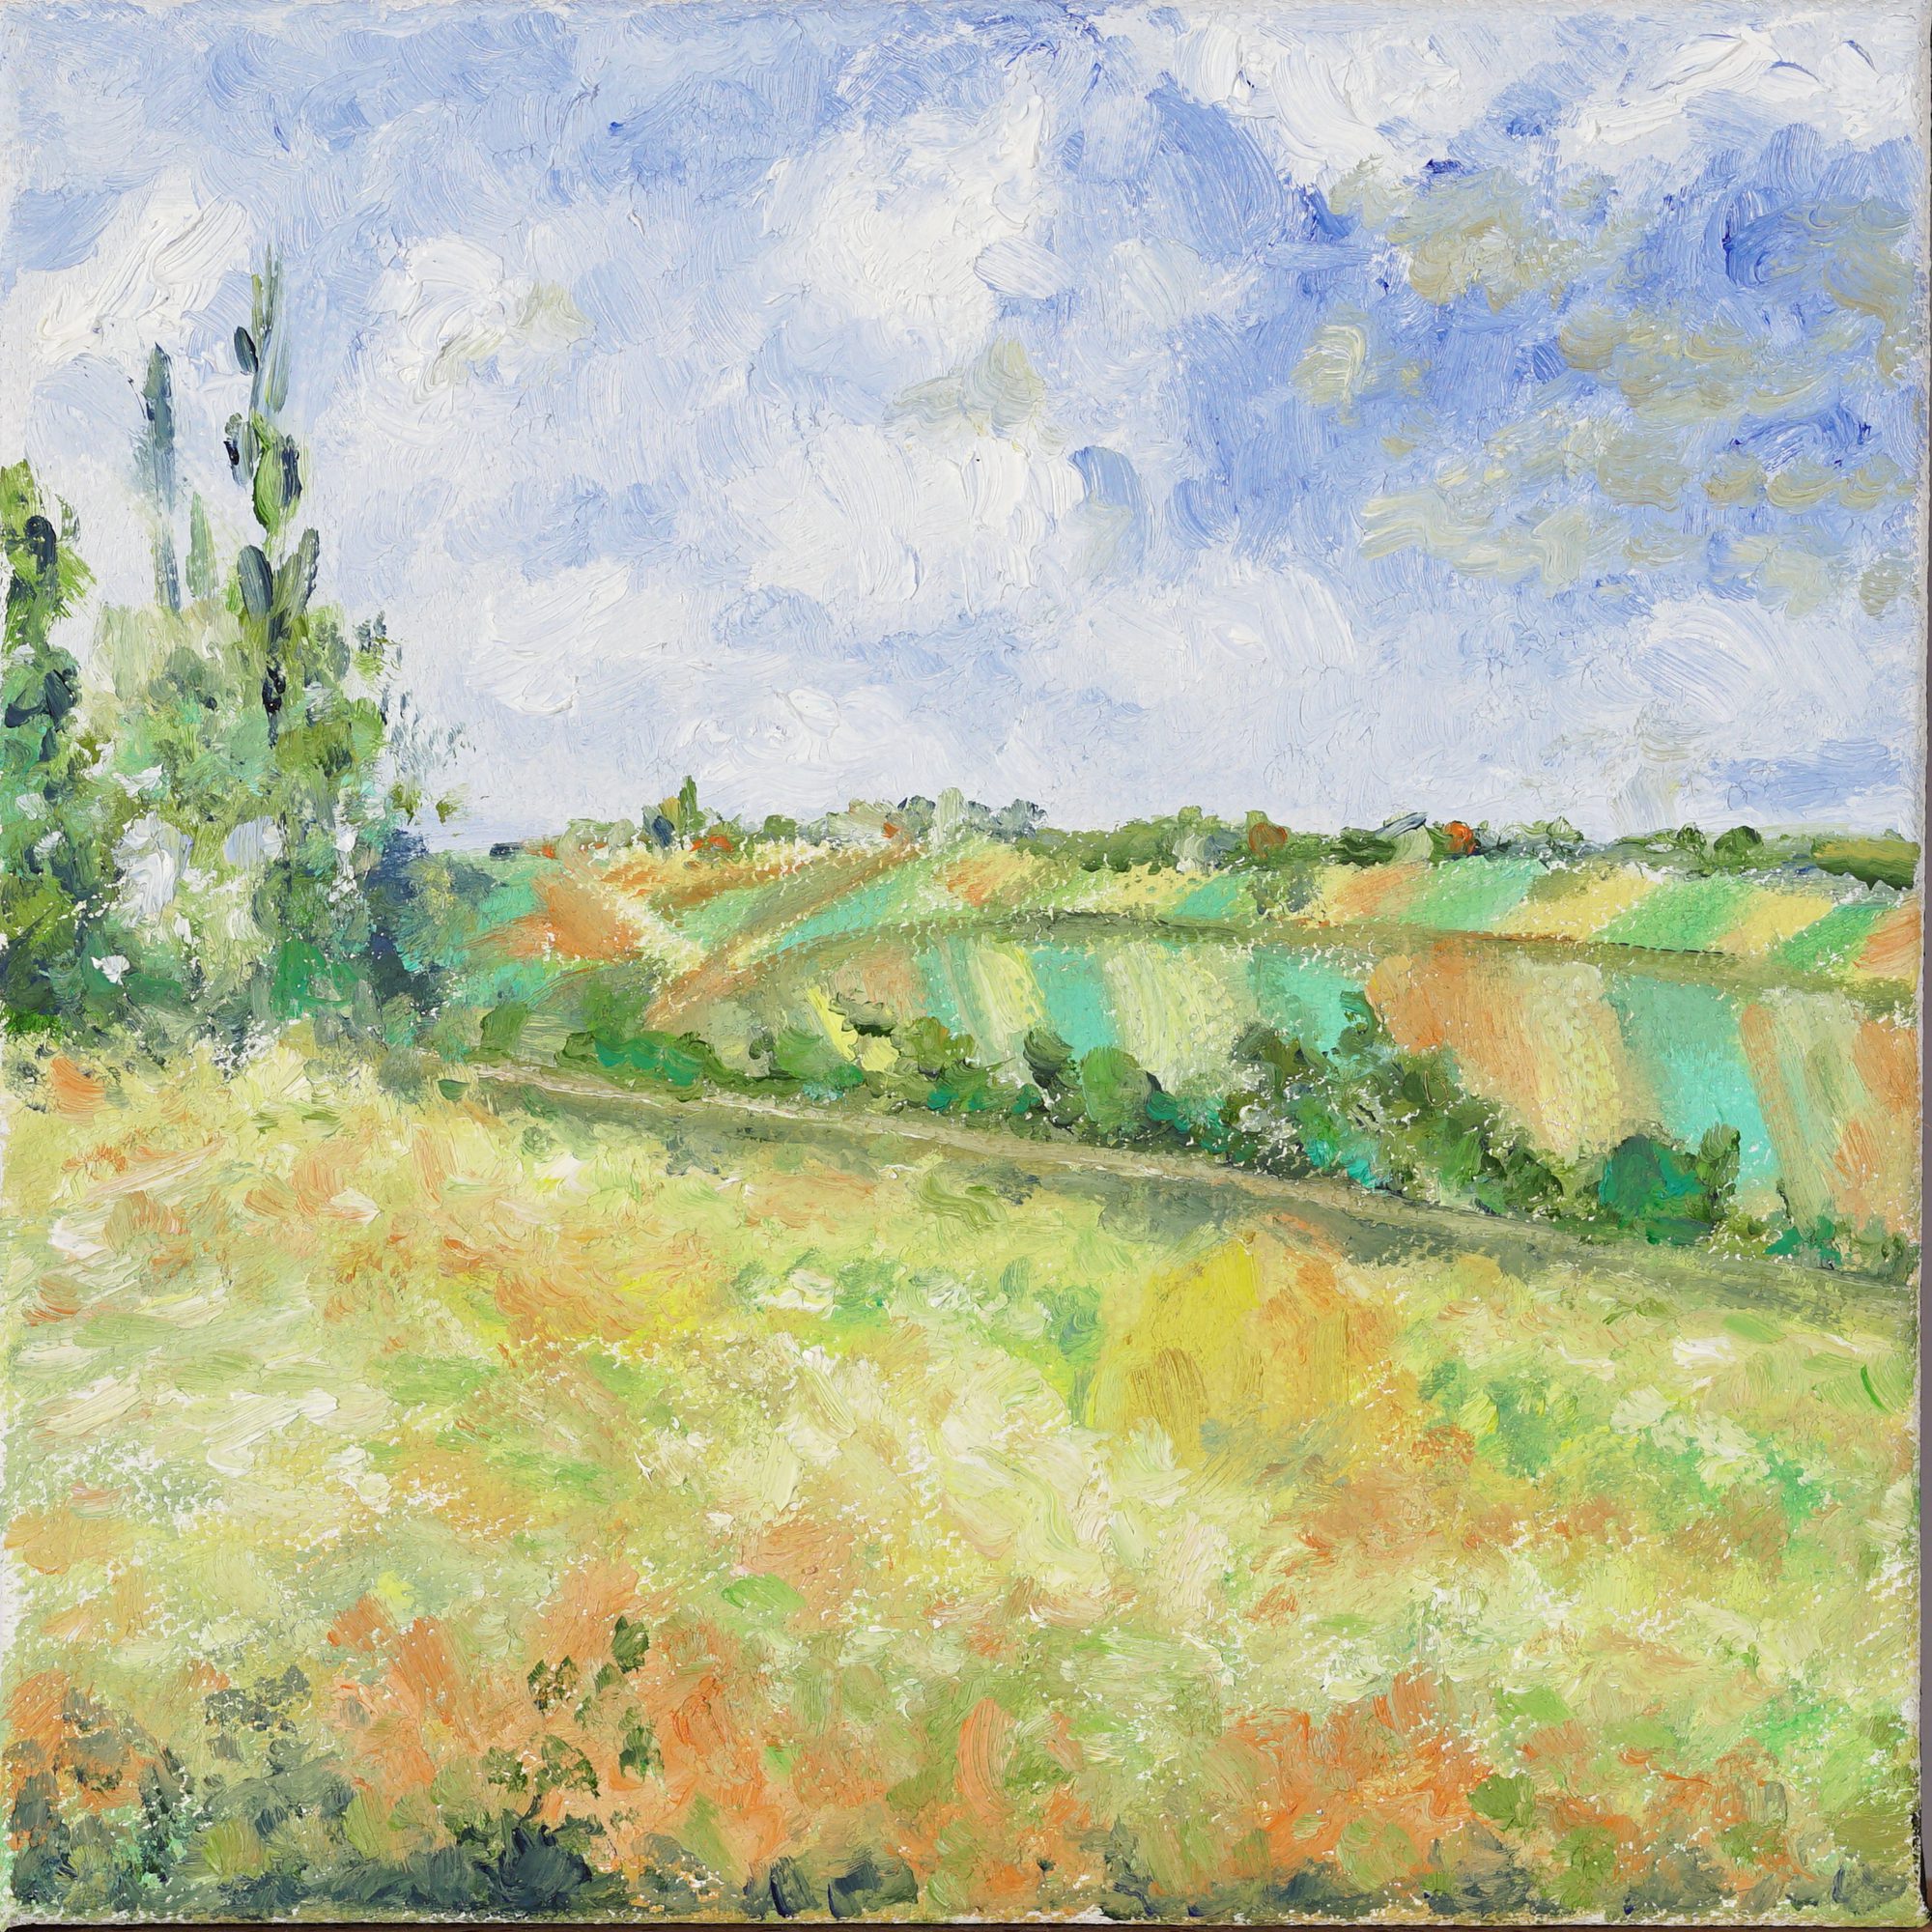 Cindy Sugg, Fields of Oats, after Pissarro